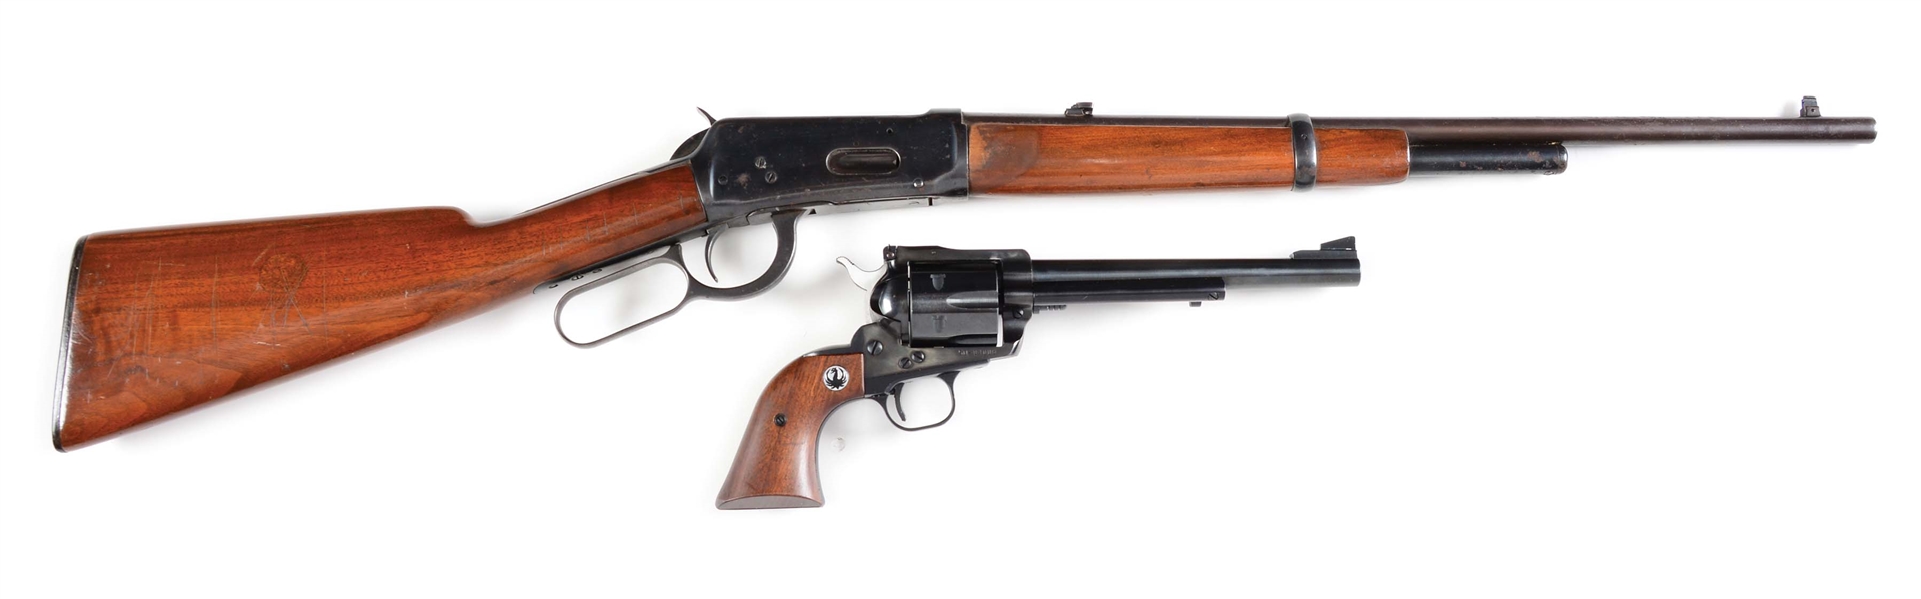 (C) LOT OF TWO: WINCHESTER 1894 LEVER ACTION .32 WS RIFLE AND A RUGER BLACKHAWK SINGLE ACTION REVOLVER IN .30 CARBINE.